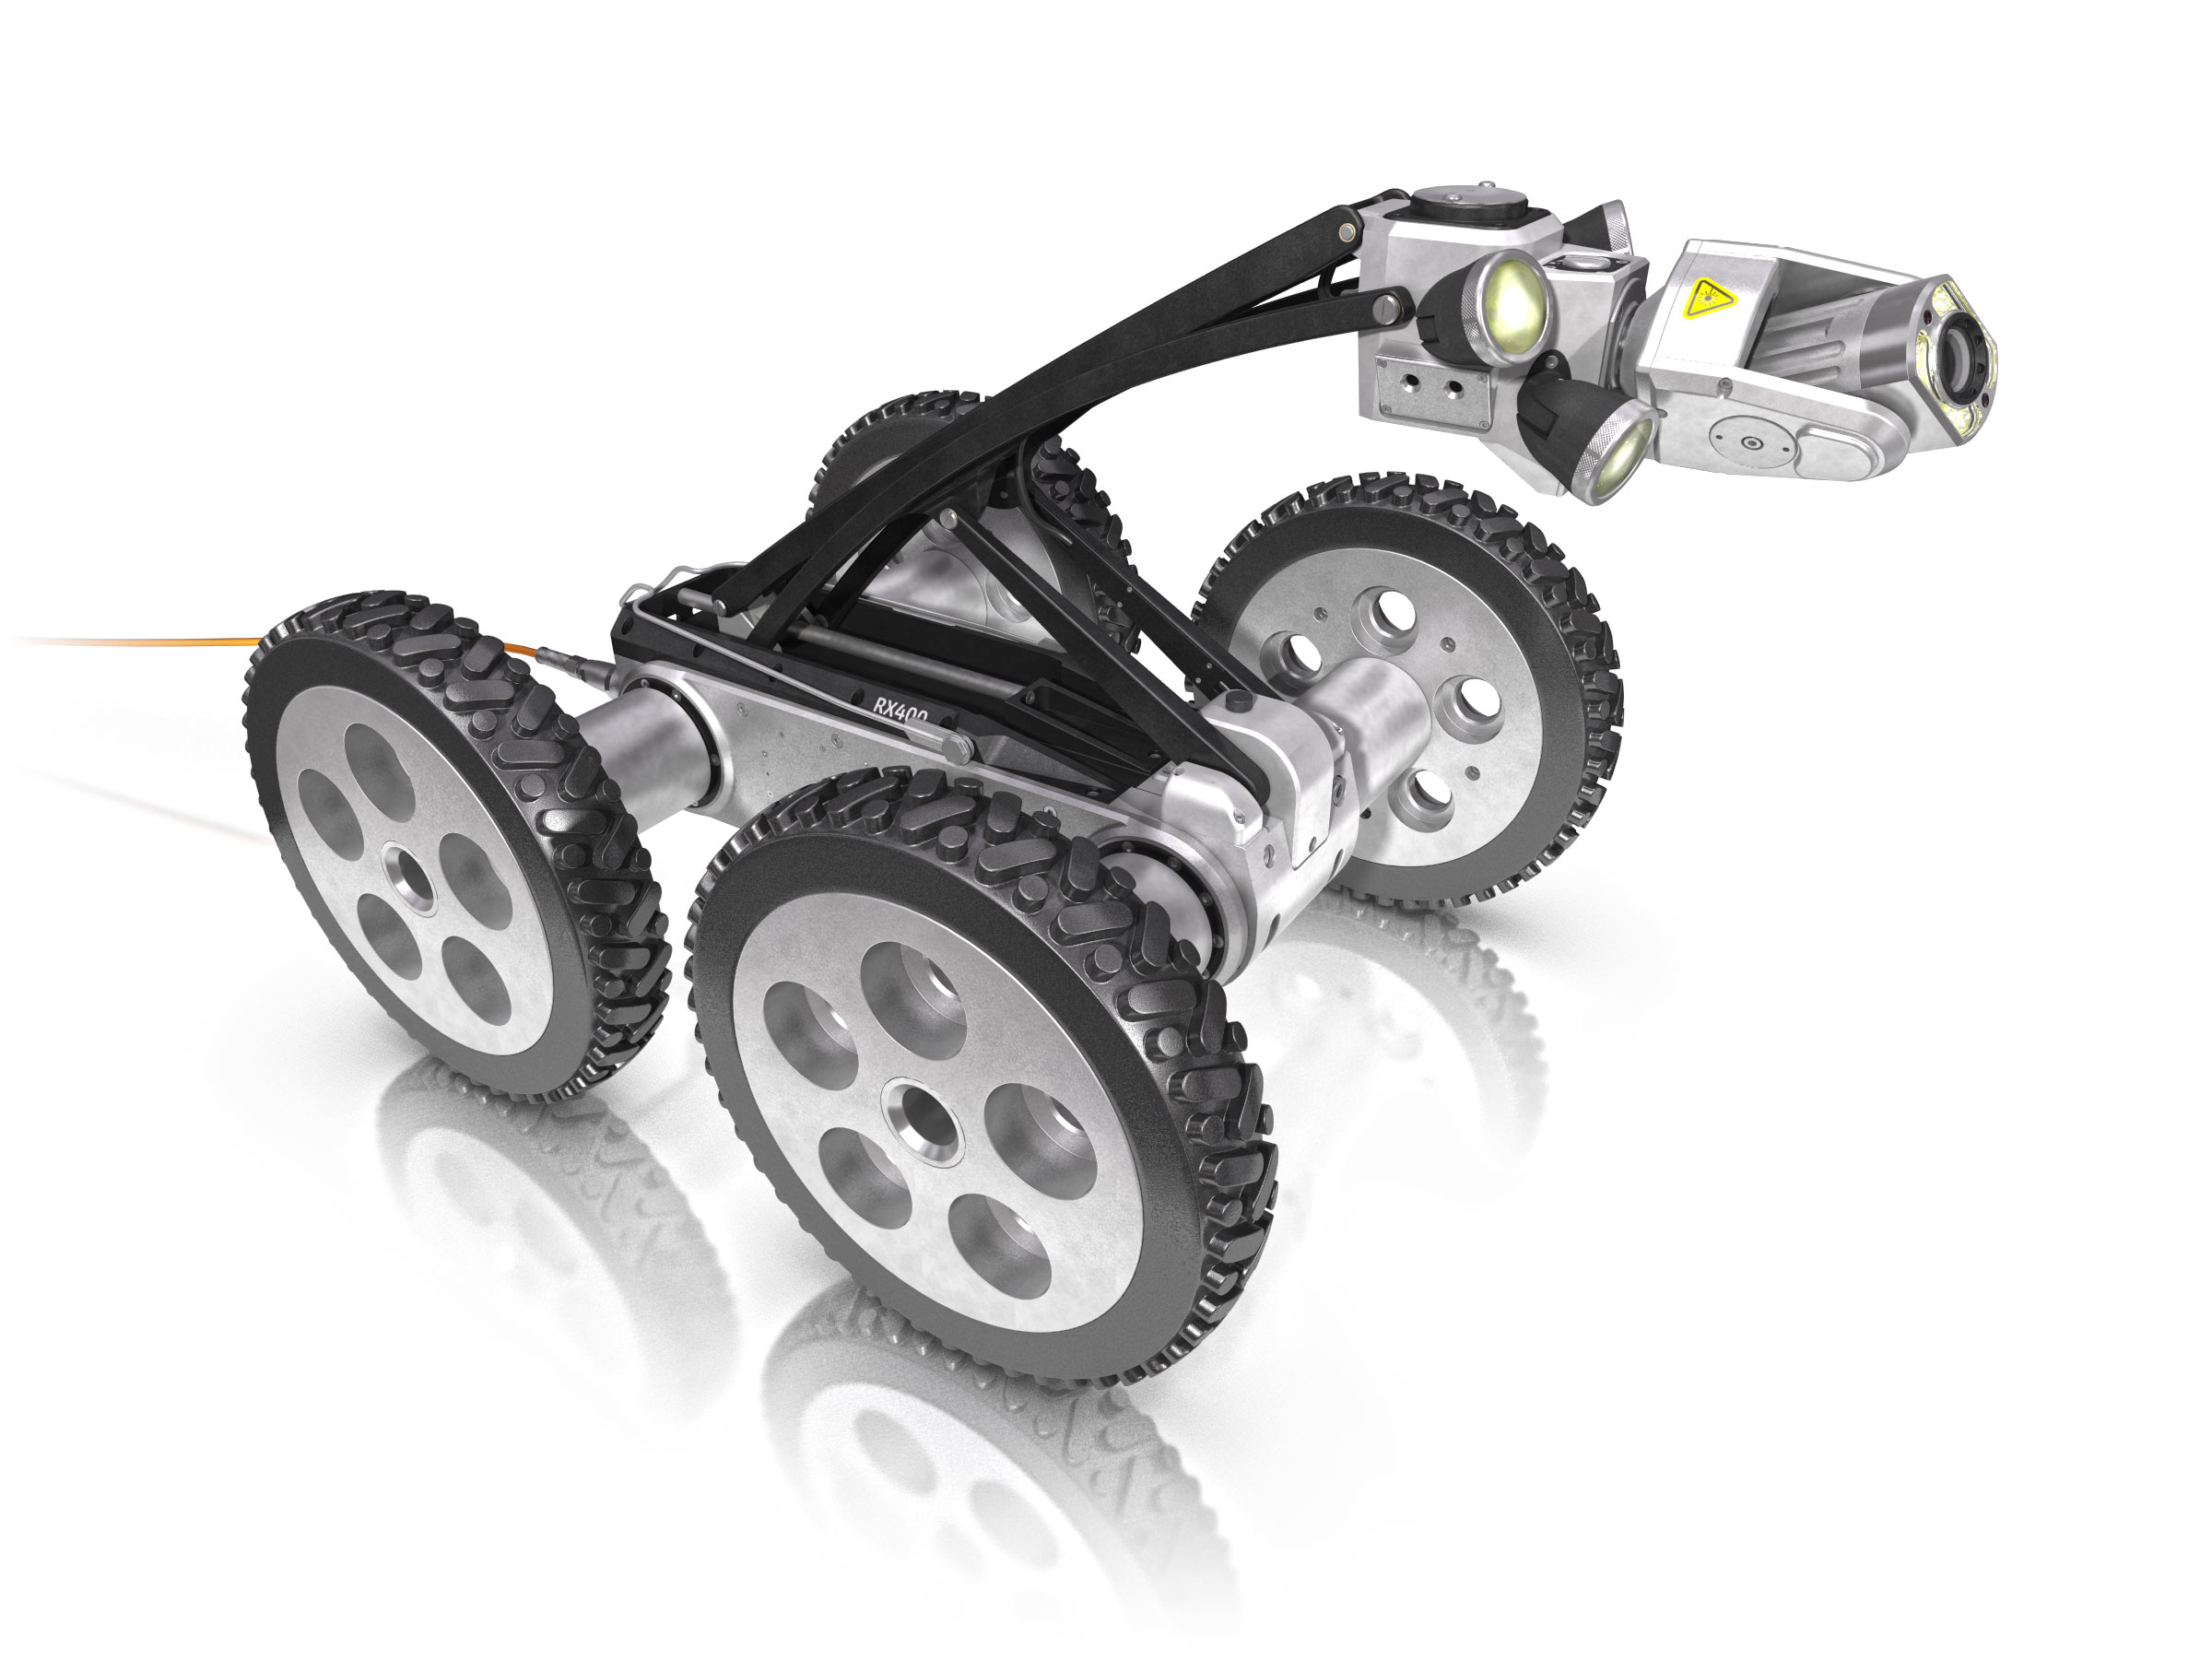 New jumbo wheels give the ROVVER X 400 crawler the weight and traction necessary to navigate large interceptor lines with high flow.